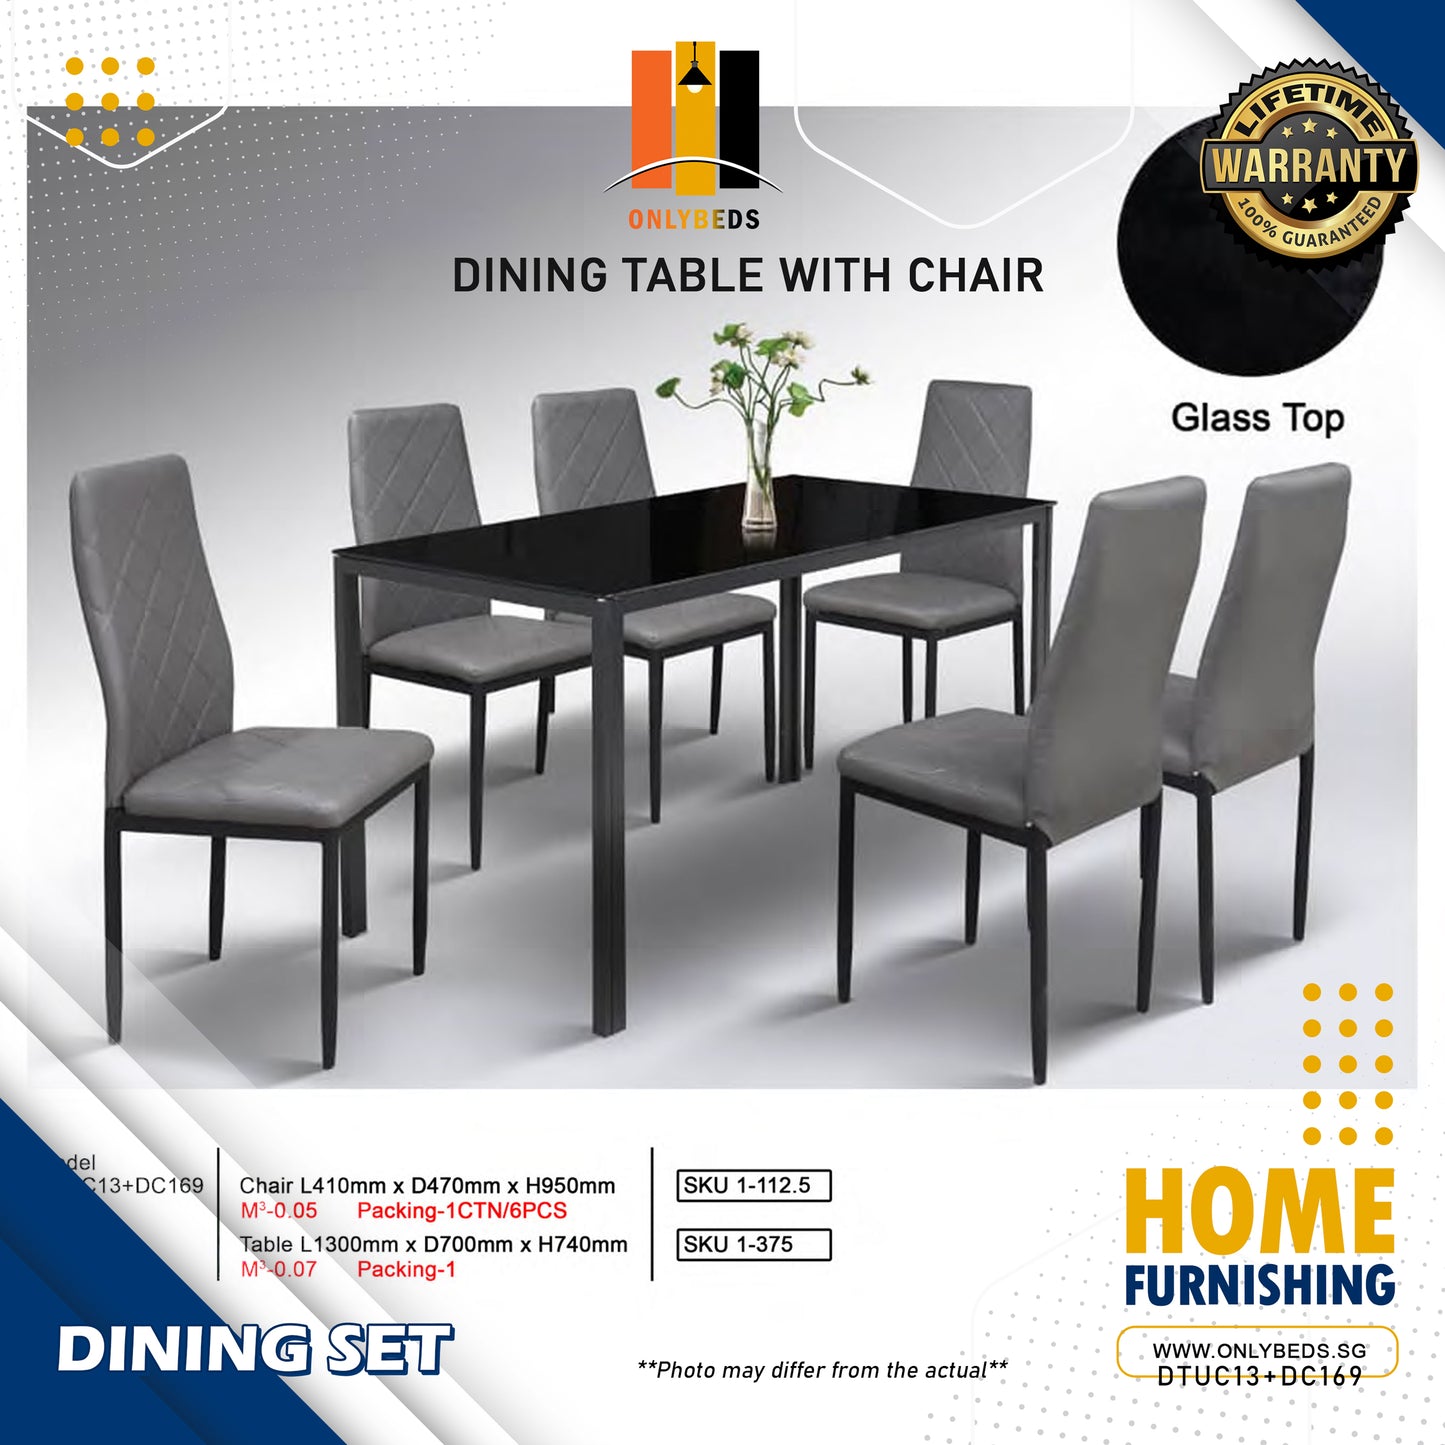 Dining Table with Chair (Dining Set) | DTUC13+DC169